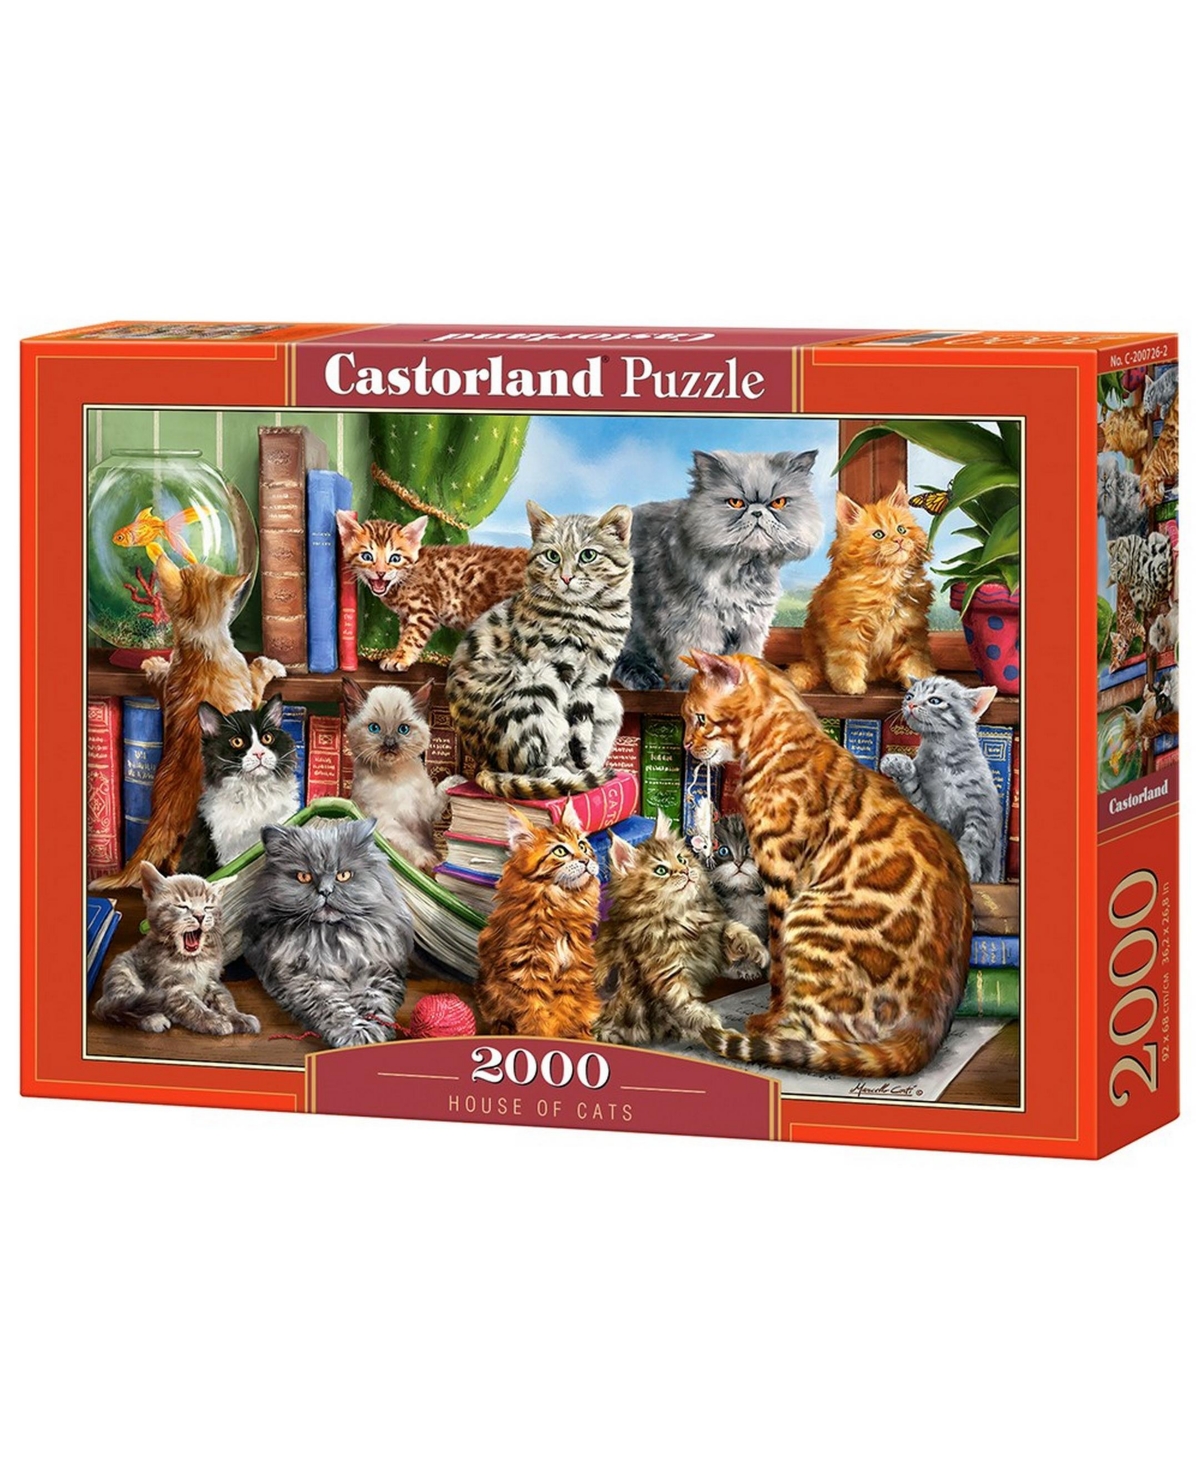 Castorland House Of Cats Jigsaw Puzzle Set, 2000 Piece In Multicolor